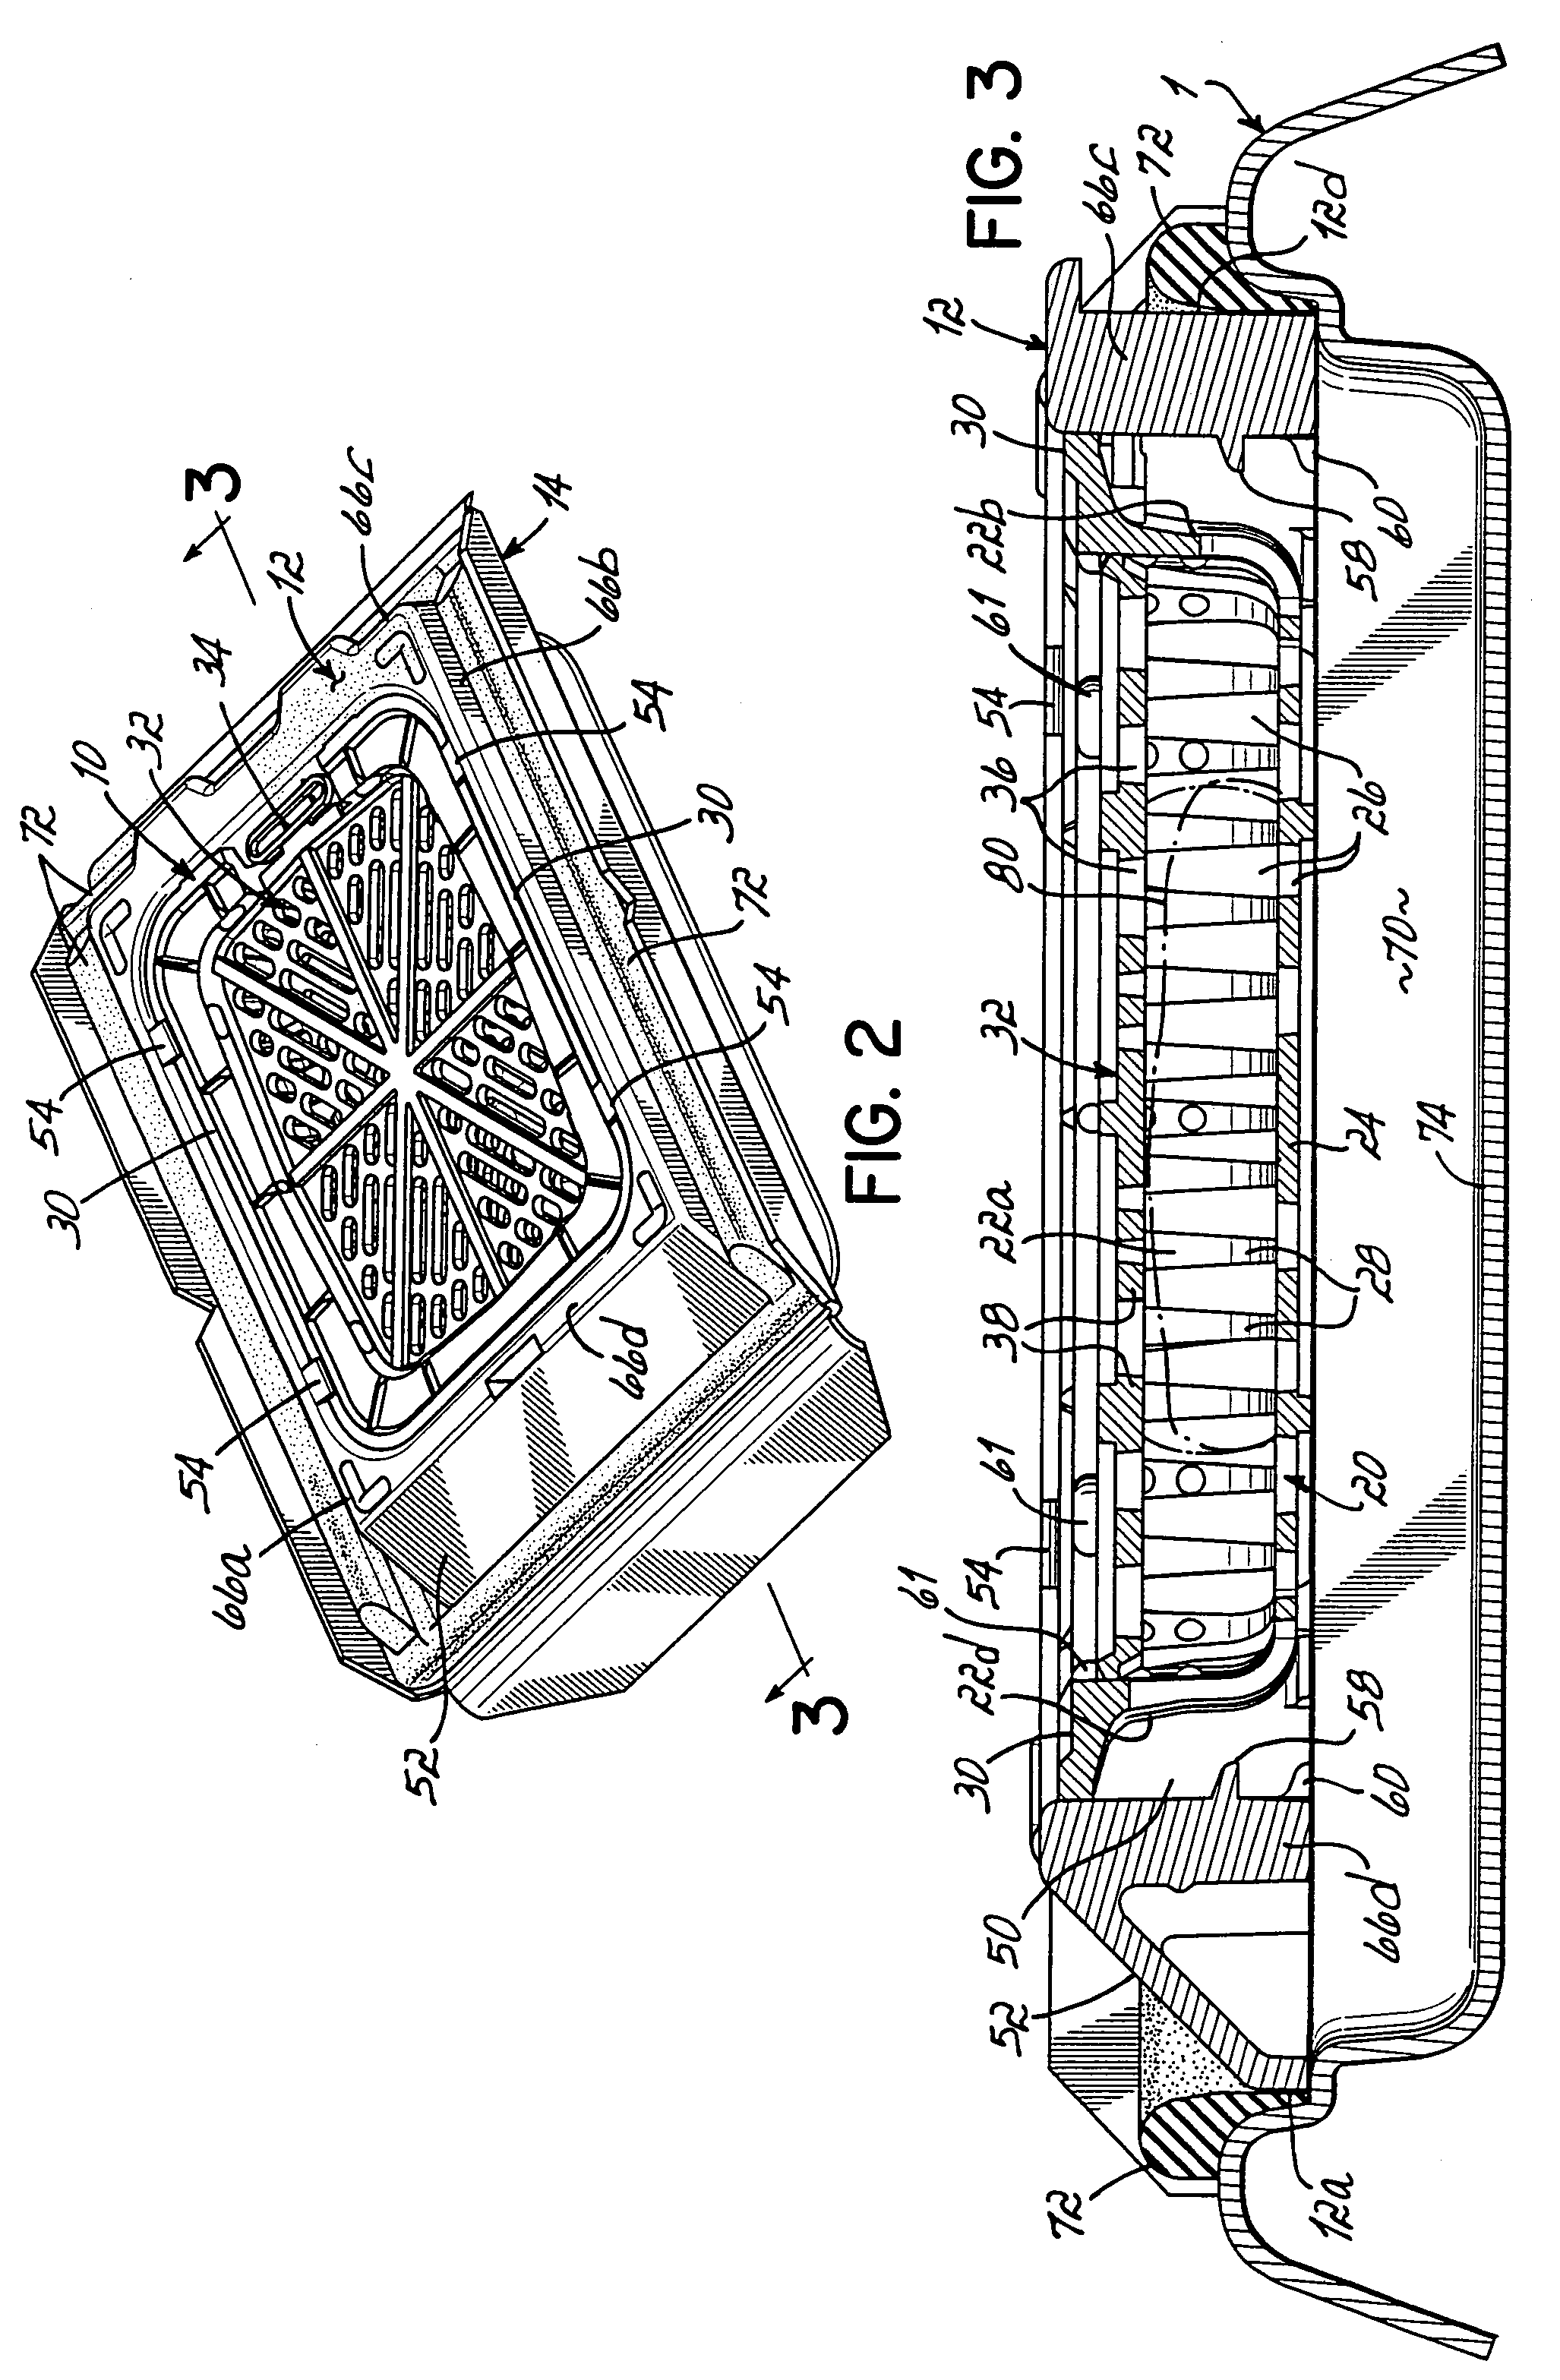 Cassette and embedding assembly for handling and holding tissue samples during processing, embedding and microtome procedures, staging devices therefore, and methods therefor